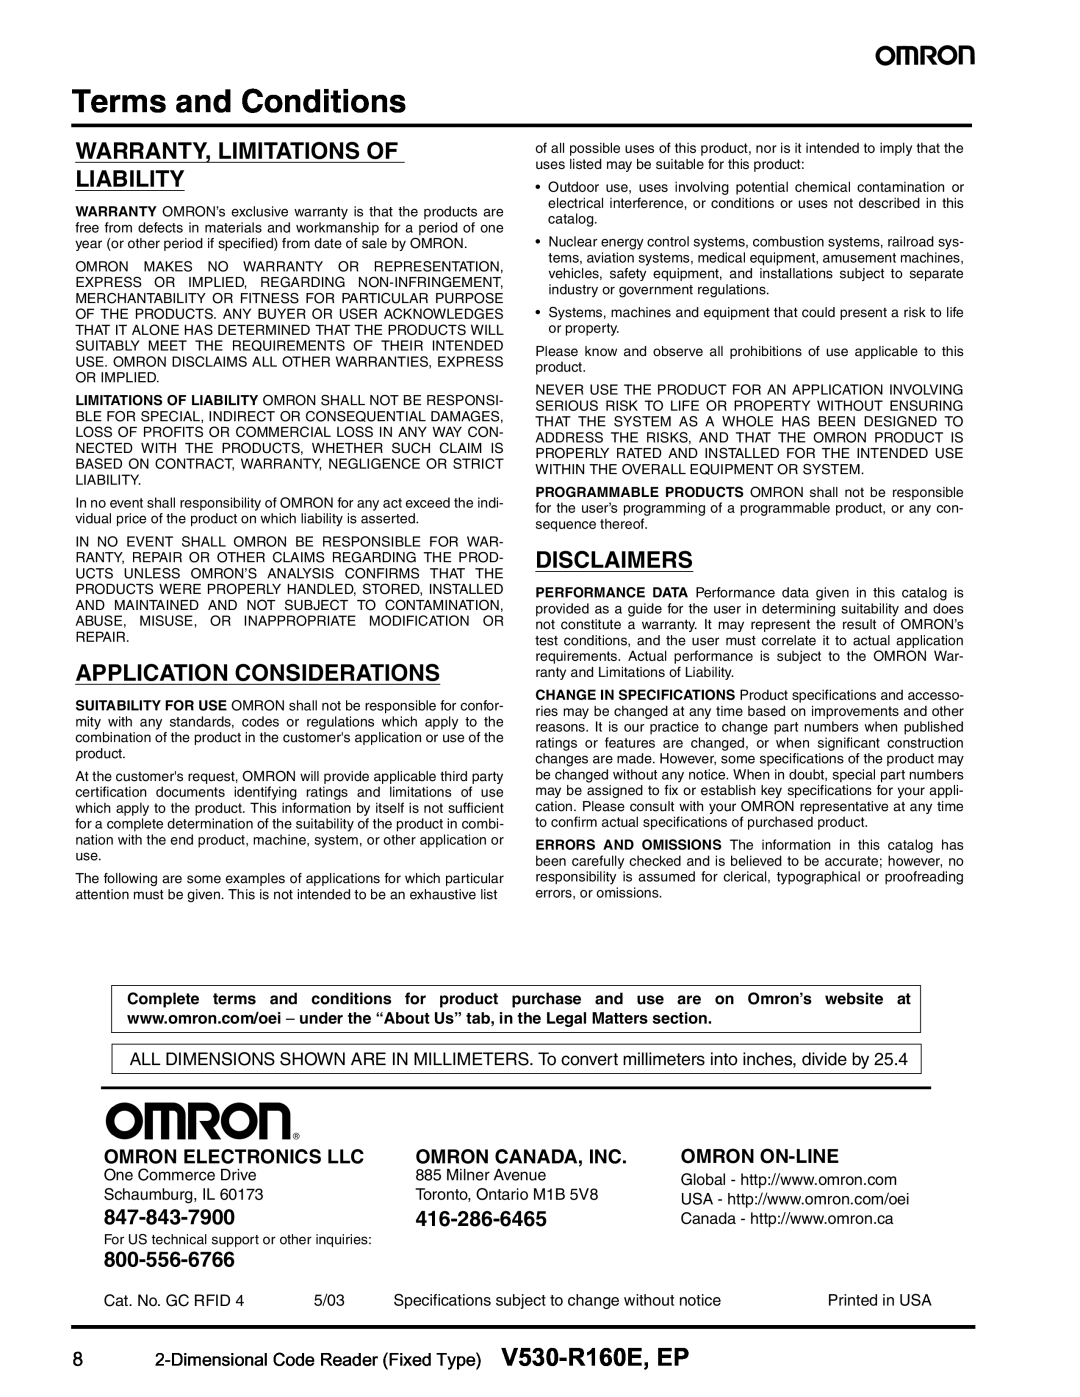 Omron V530-R160E Terms and Conditions, Omron Electronics Llc, Omron On-Line, Omron Canada, Inc, Application Considerations 